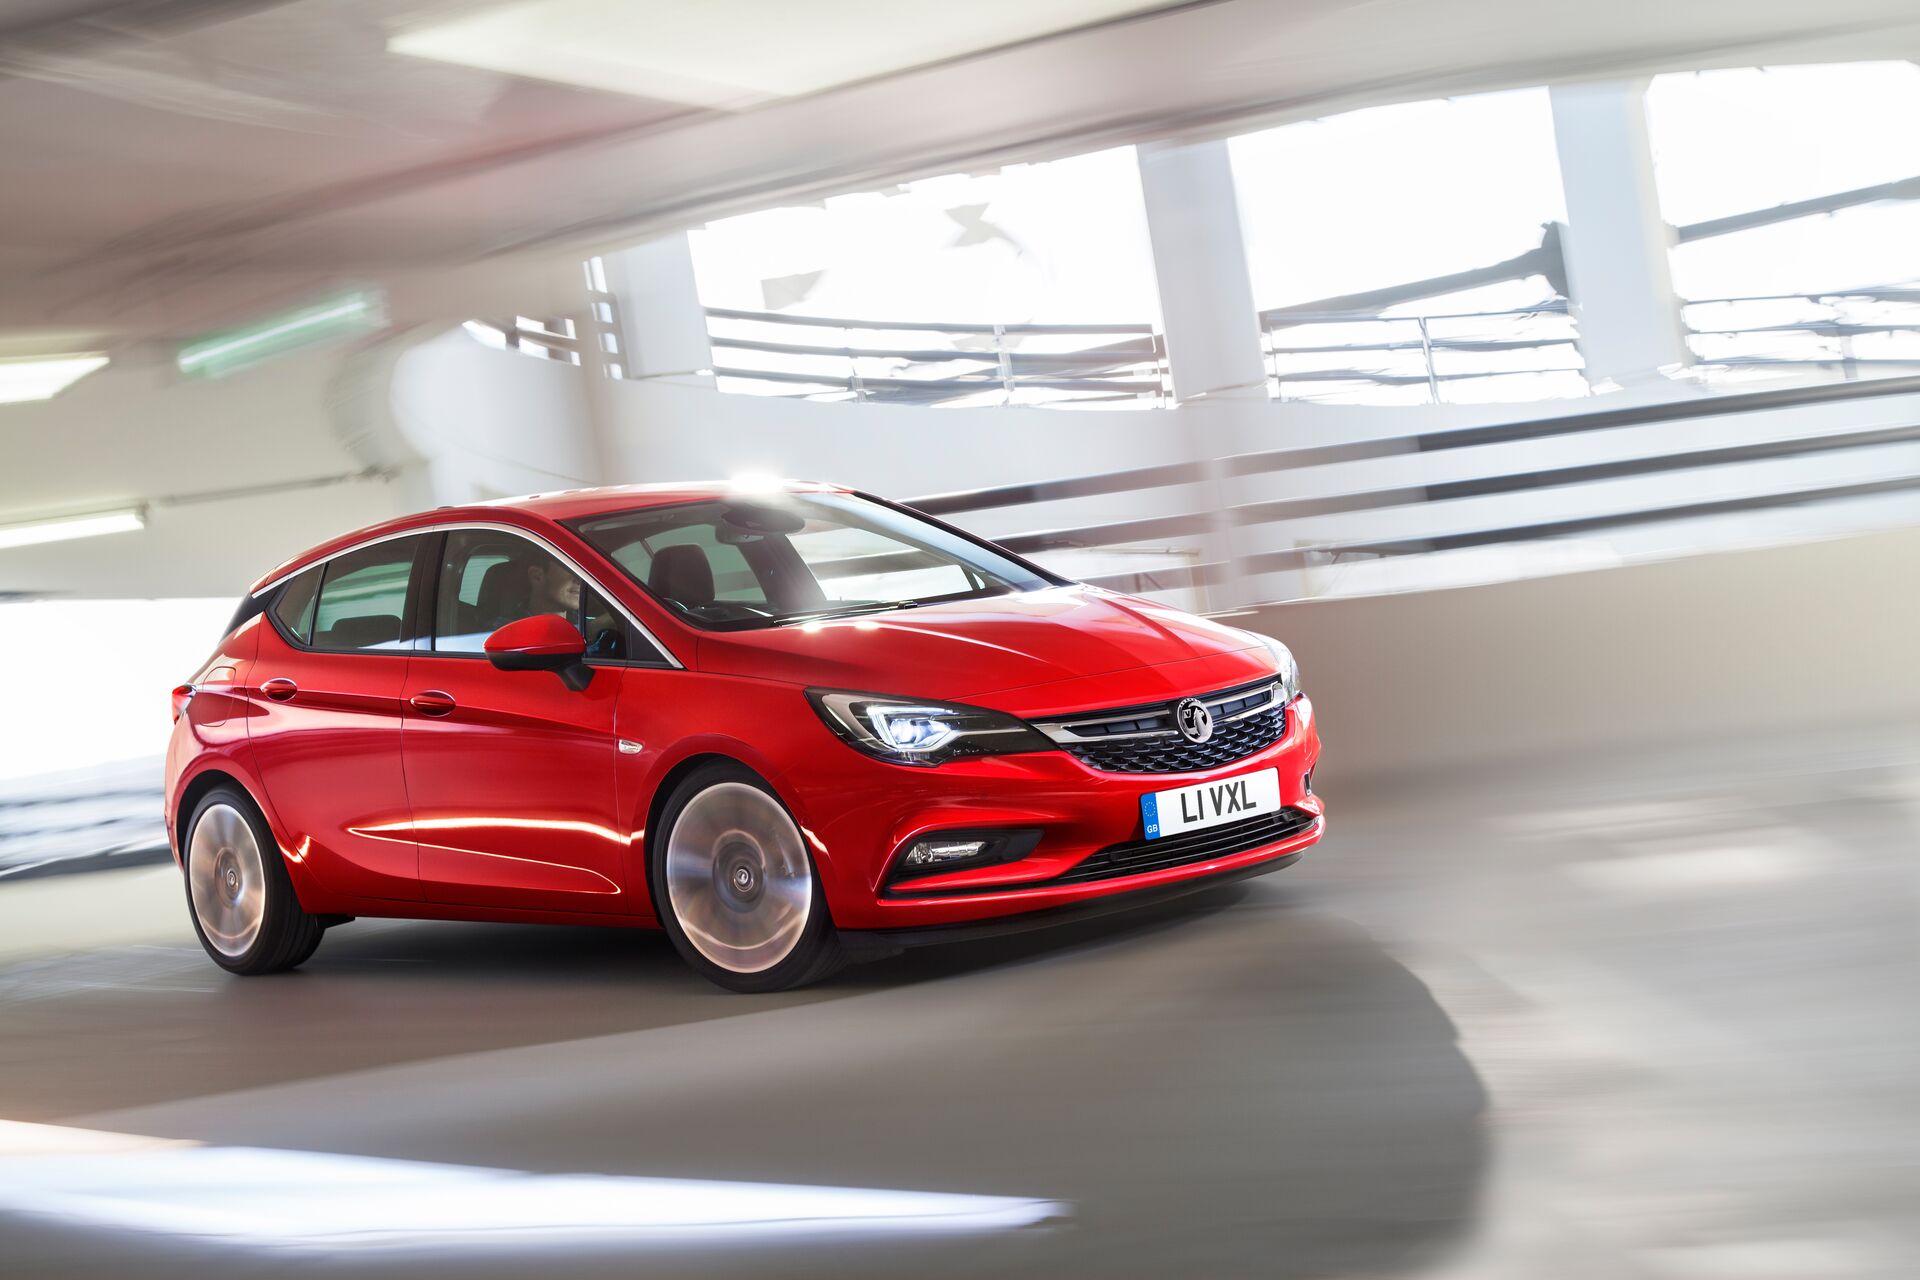 Opel Astra K 1.4 Turbo (150 Hp) 2018 - 2019 Specs and Technical Data ...